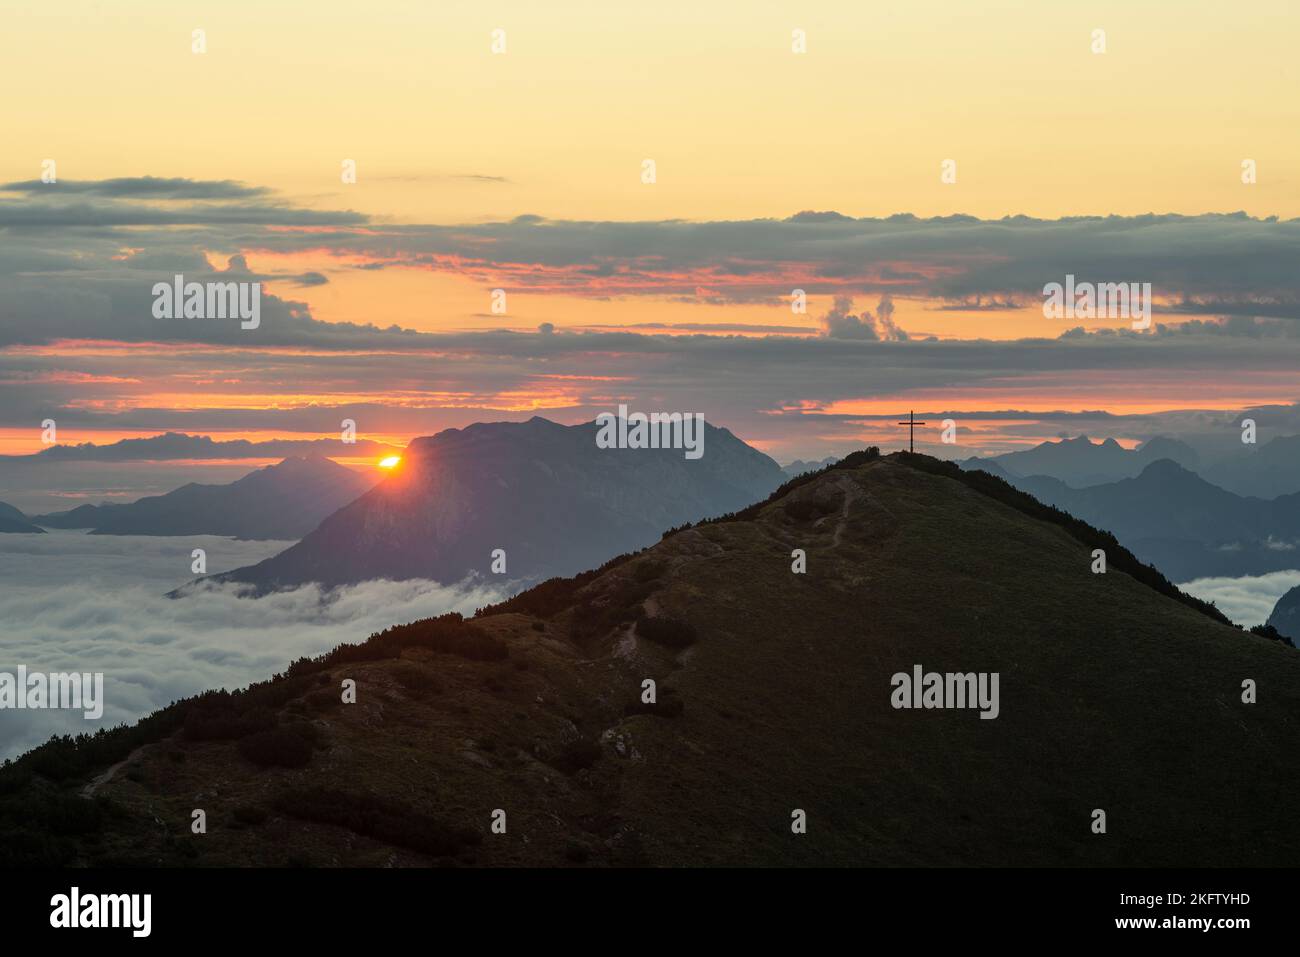 View from Mount Frechjoch to the sunrise over the Veitsberg and the Kaiser Mountains, Tyrol, Austria Stock Photo